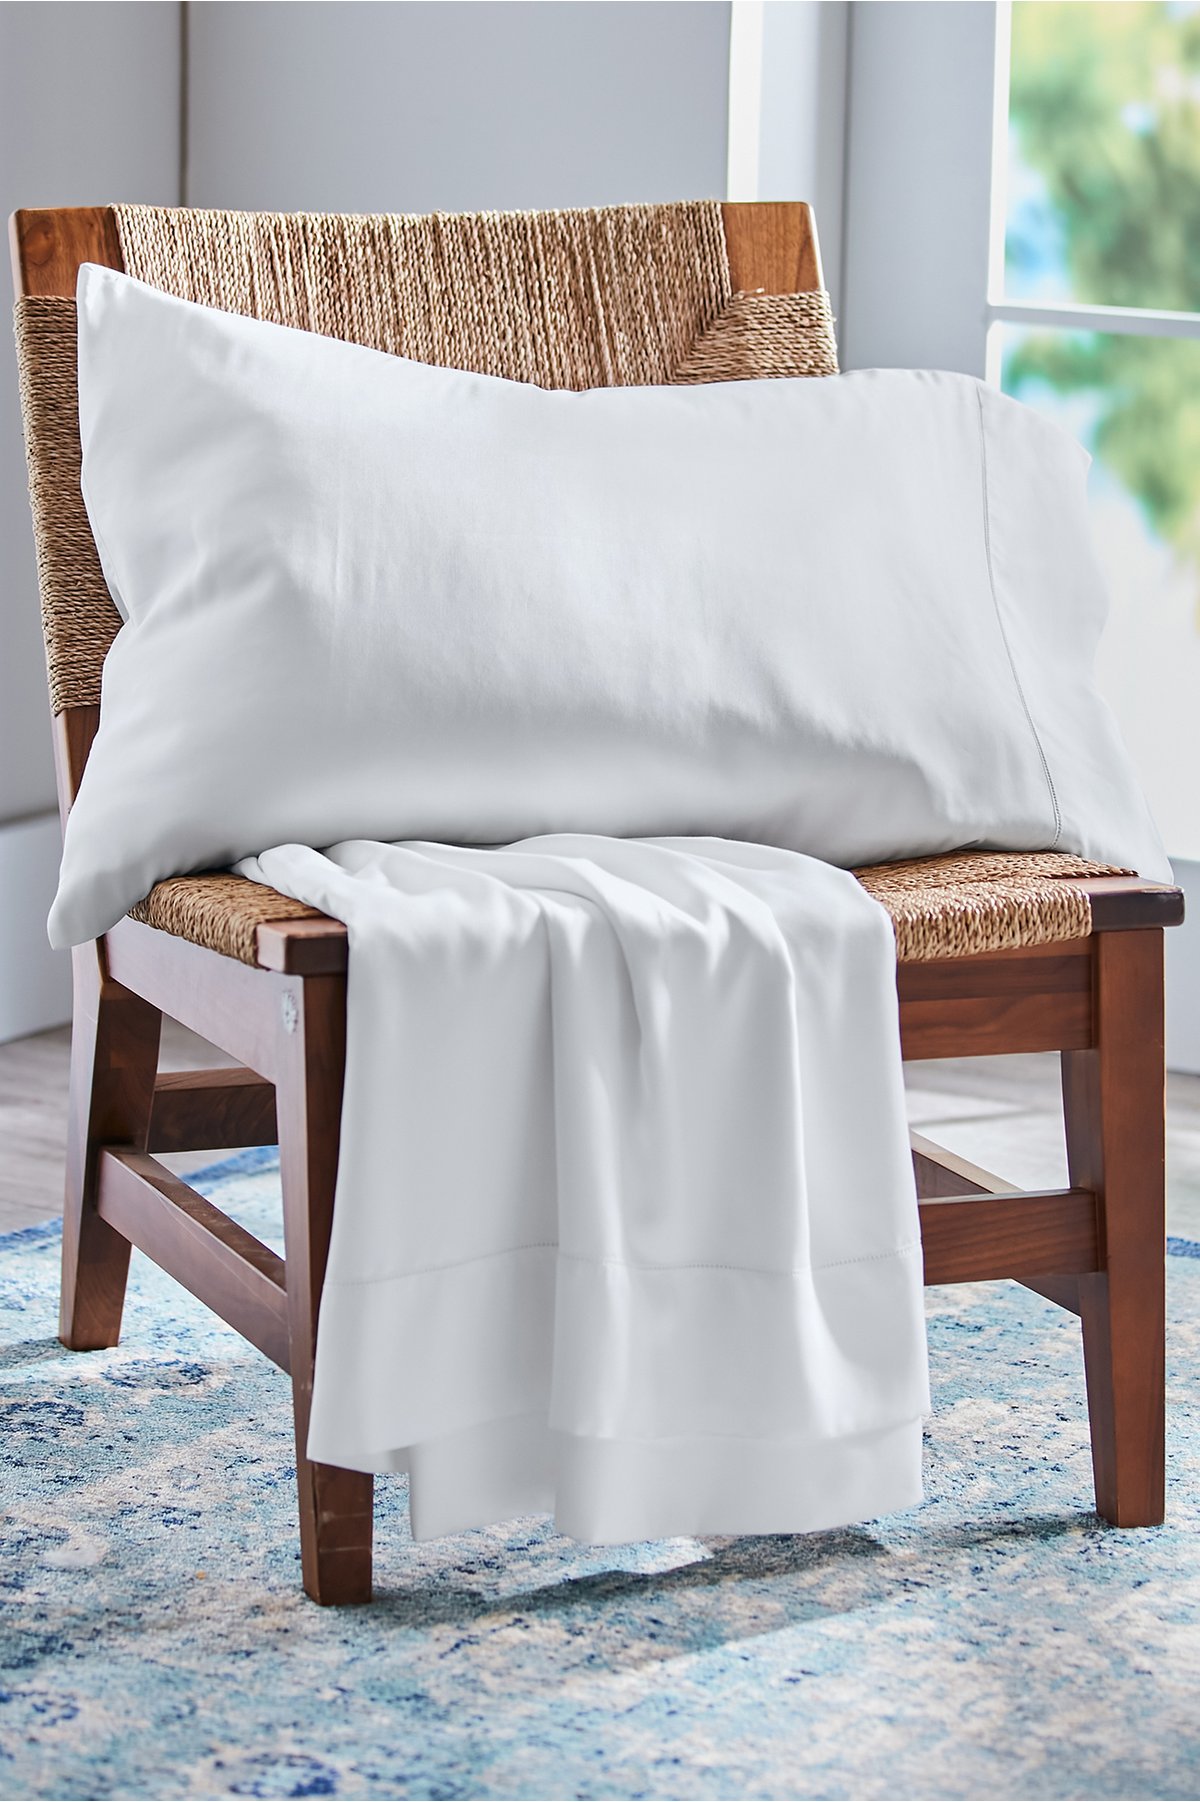 Blissful Bamboo Sheet Set by Soft Surroundings, in White size King